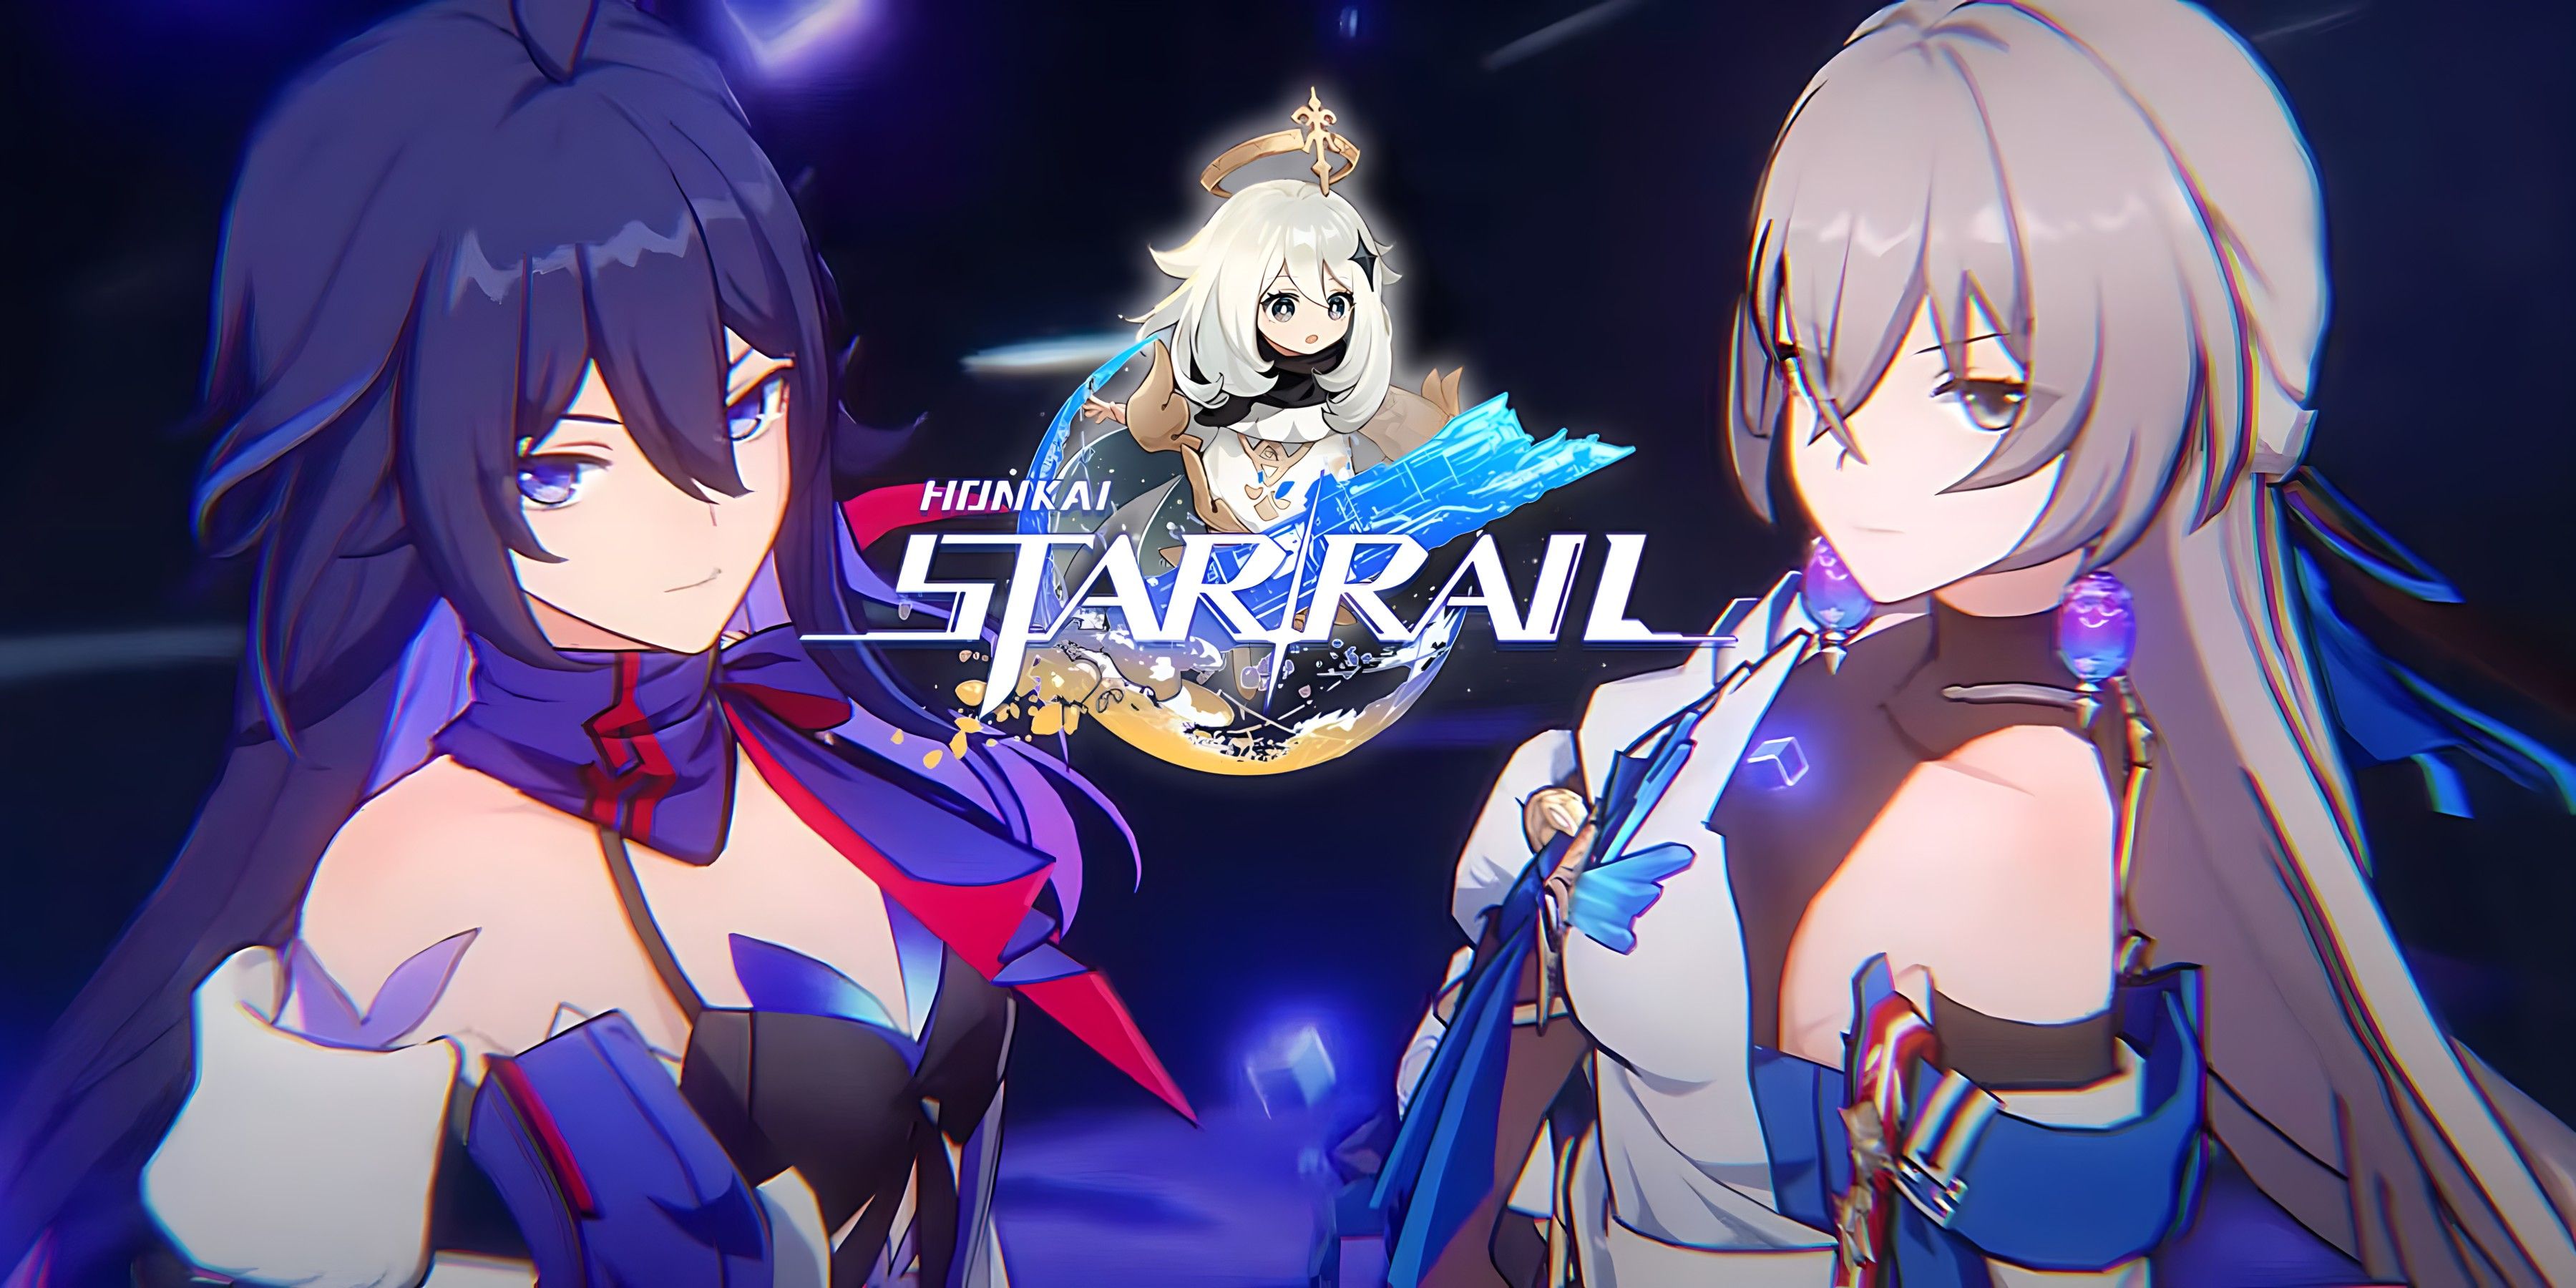 How Honkai Star Rail and Genshin Impact Are Connected